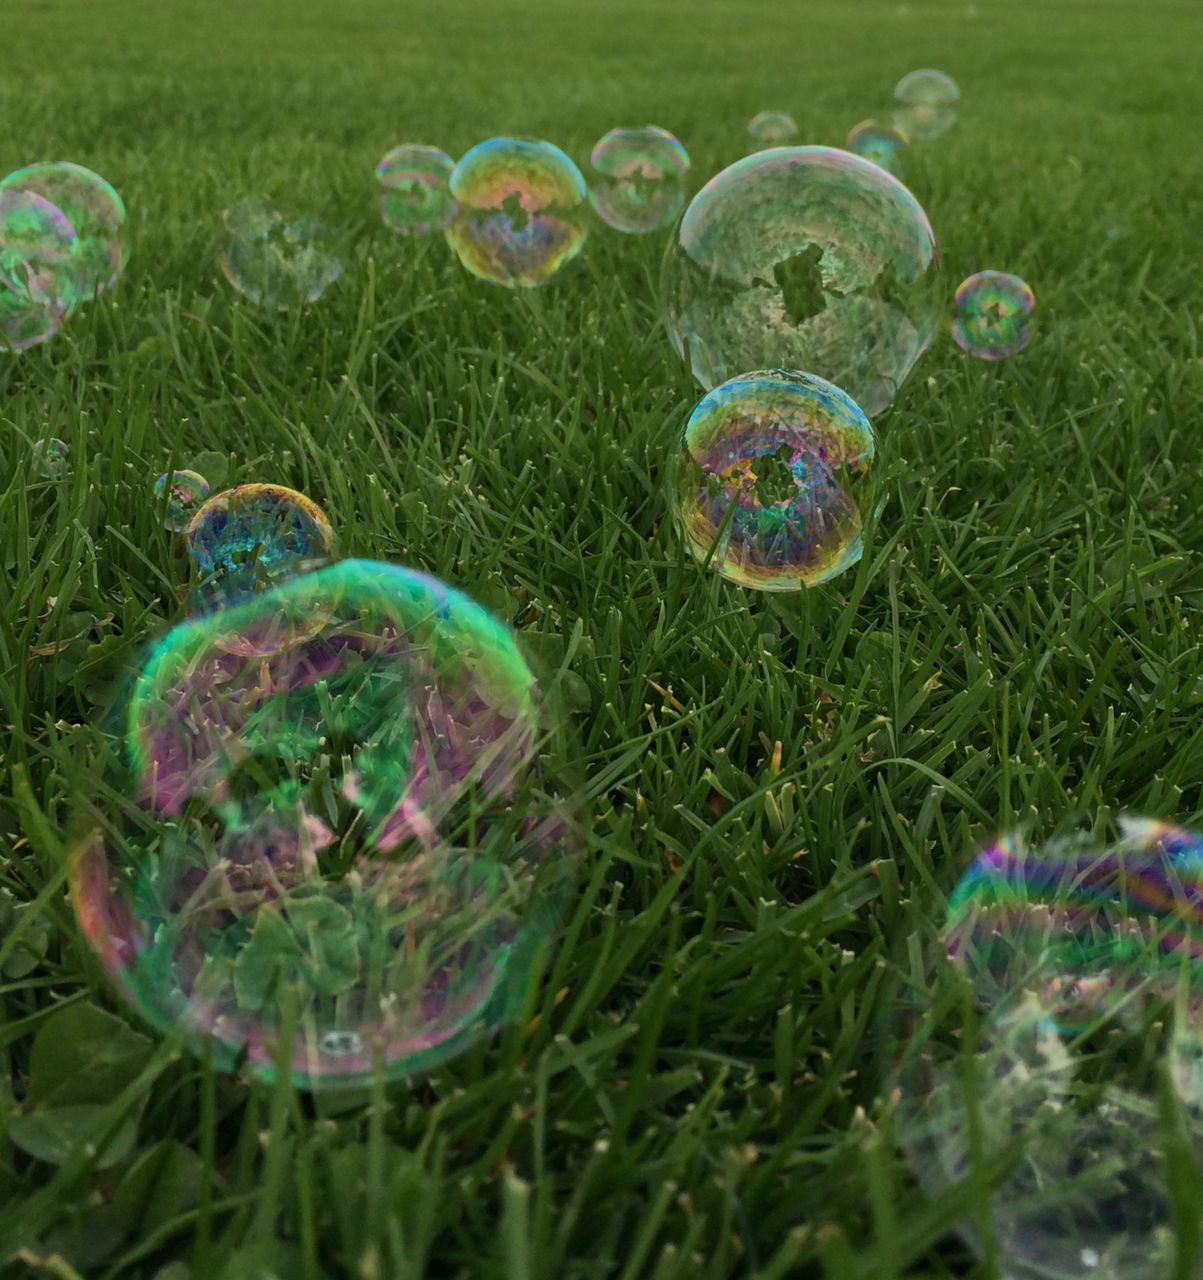 fragility, bubble, soap sud, liquid bubble, plant, nature, grass, bubble wand, green, field, lawn, mid-air, no people, sphere, day, transparent, growth, land, lightweight, multi colored, shape, beauty in nature, outdoors, soap, environment, close-up, flower, blowing, geometric shape, circle